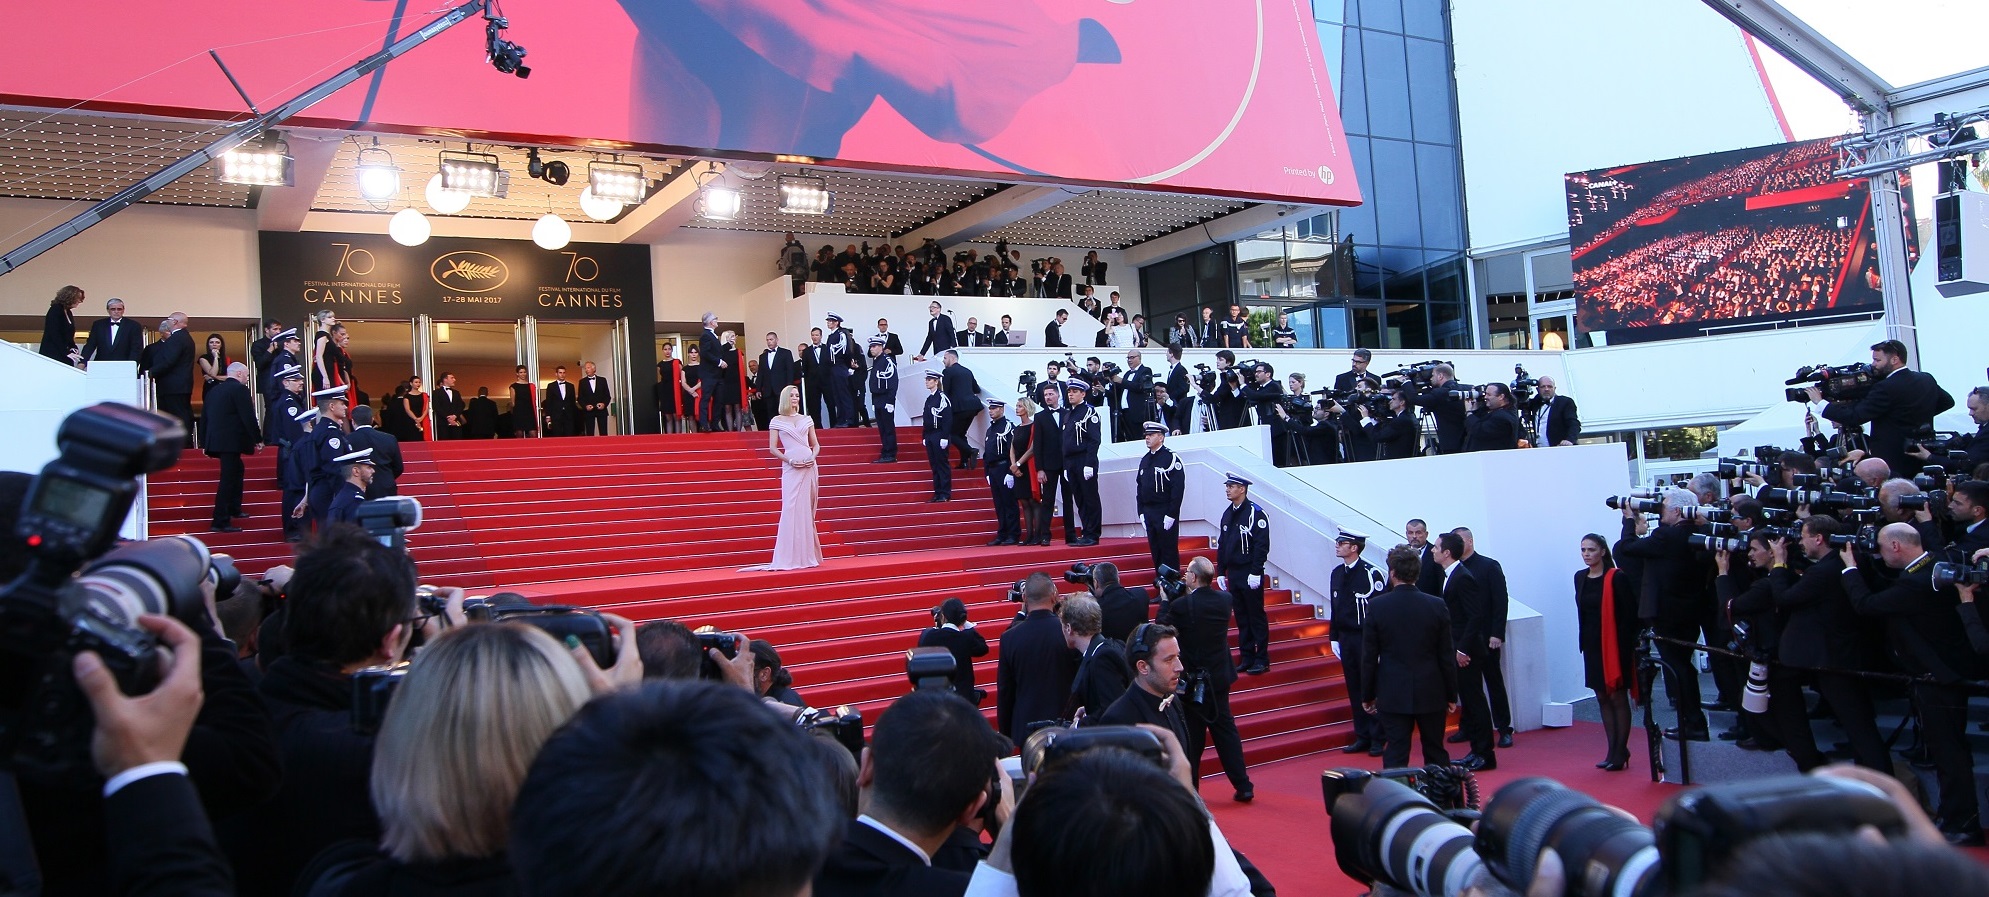 how to attend cannes film festival - buy tickets and vip passes